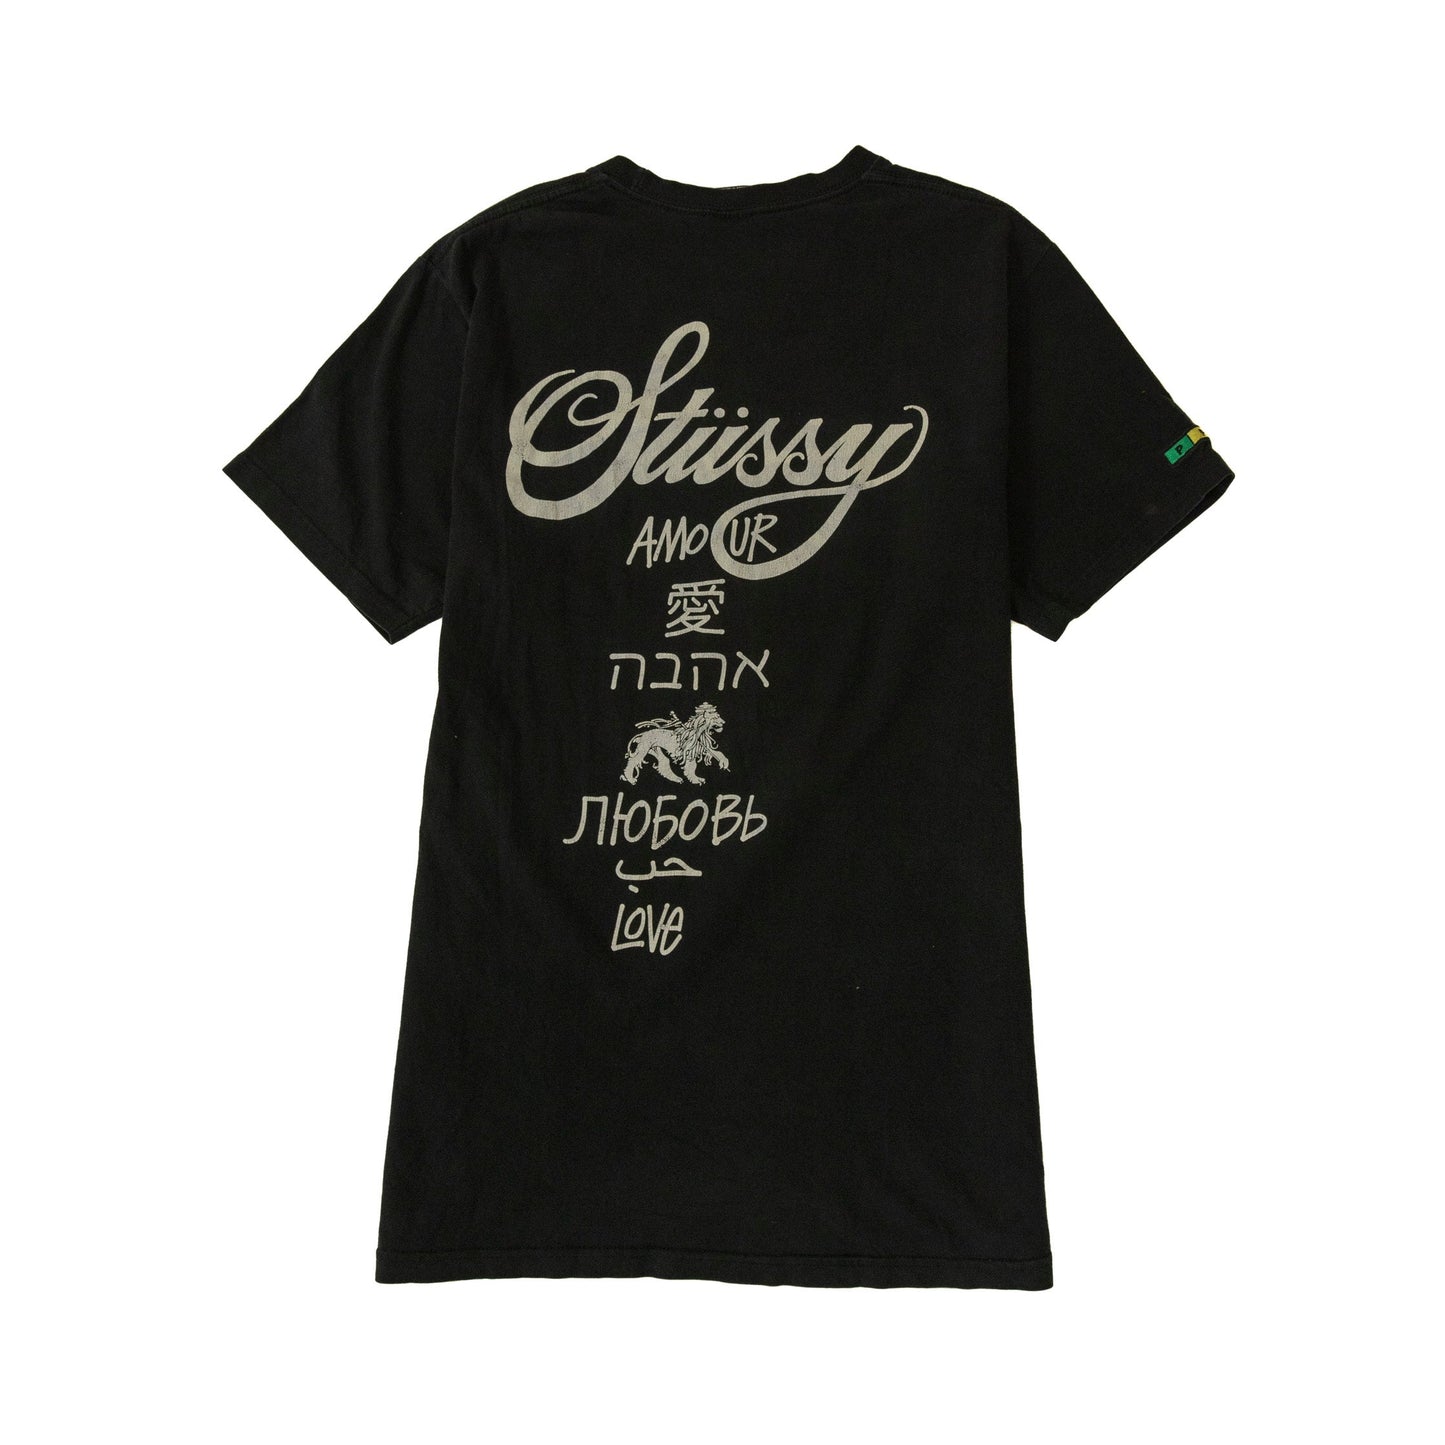 Stussy Asia World Tour Back Graphic Tee